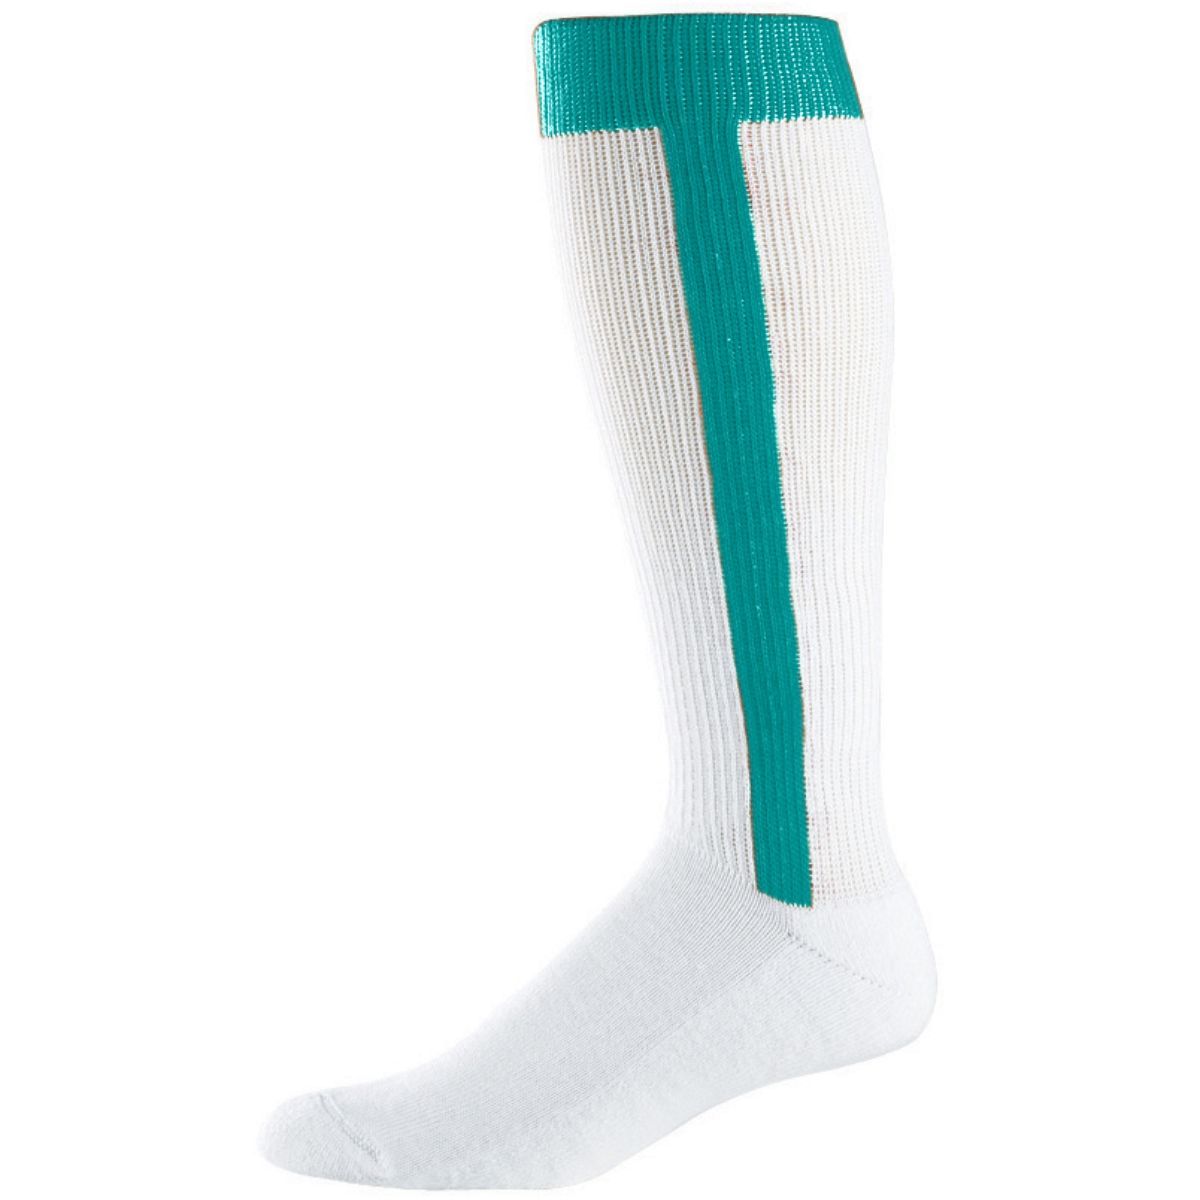 Augusta Sportswear Baseball Stirrup Sock in Teal  -Part of the Accessories, Augusta-Products, Accessories-Socks, Baseball, All-Sports, All-Sports-1 product lines at KanaleyCreations.com